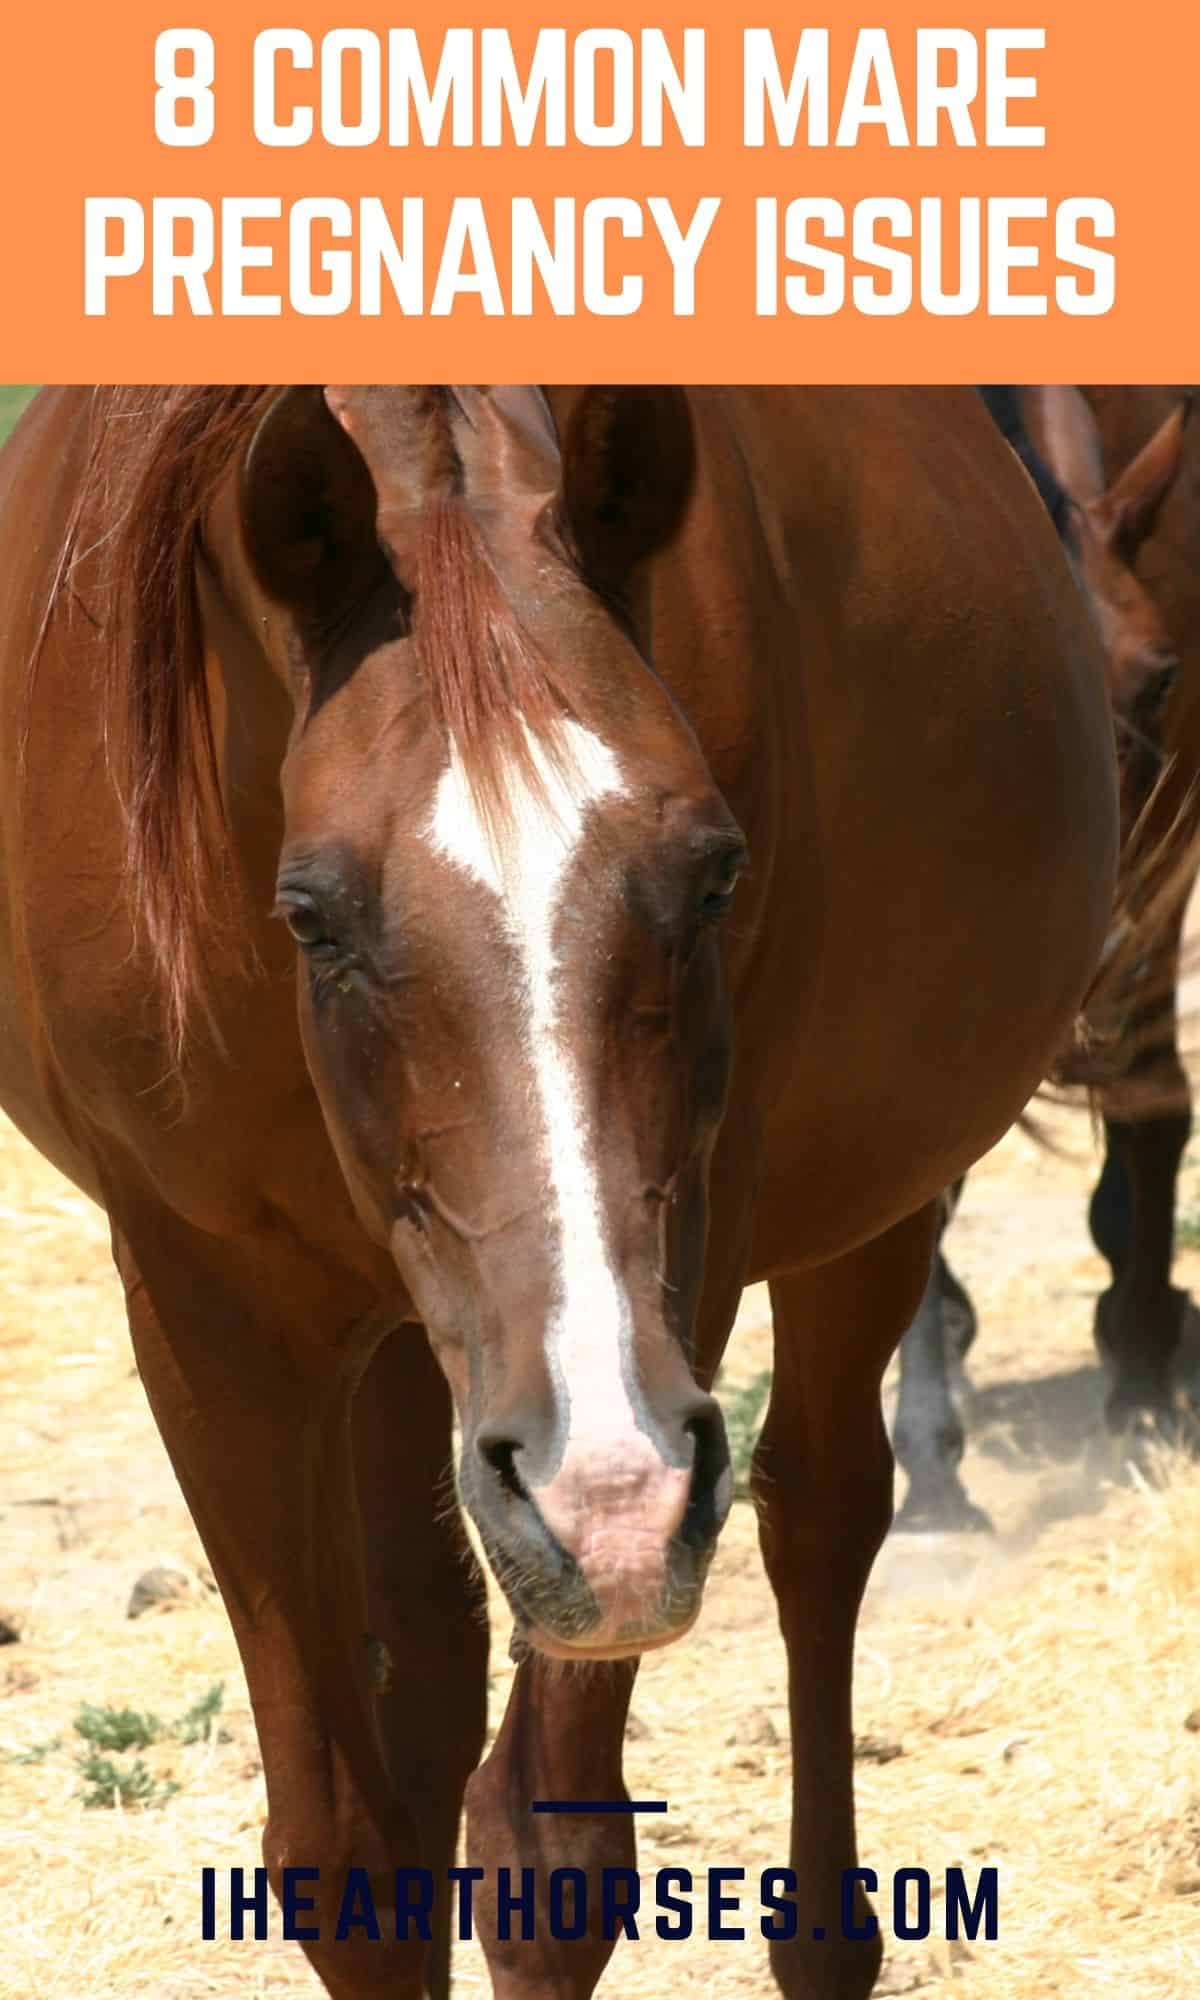 Brown pregnant mare with orange banner on top of image that says 8 common mare pregnancy issues